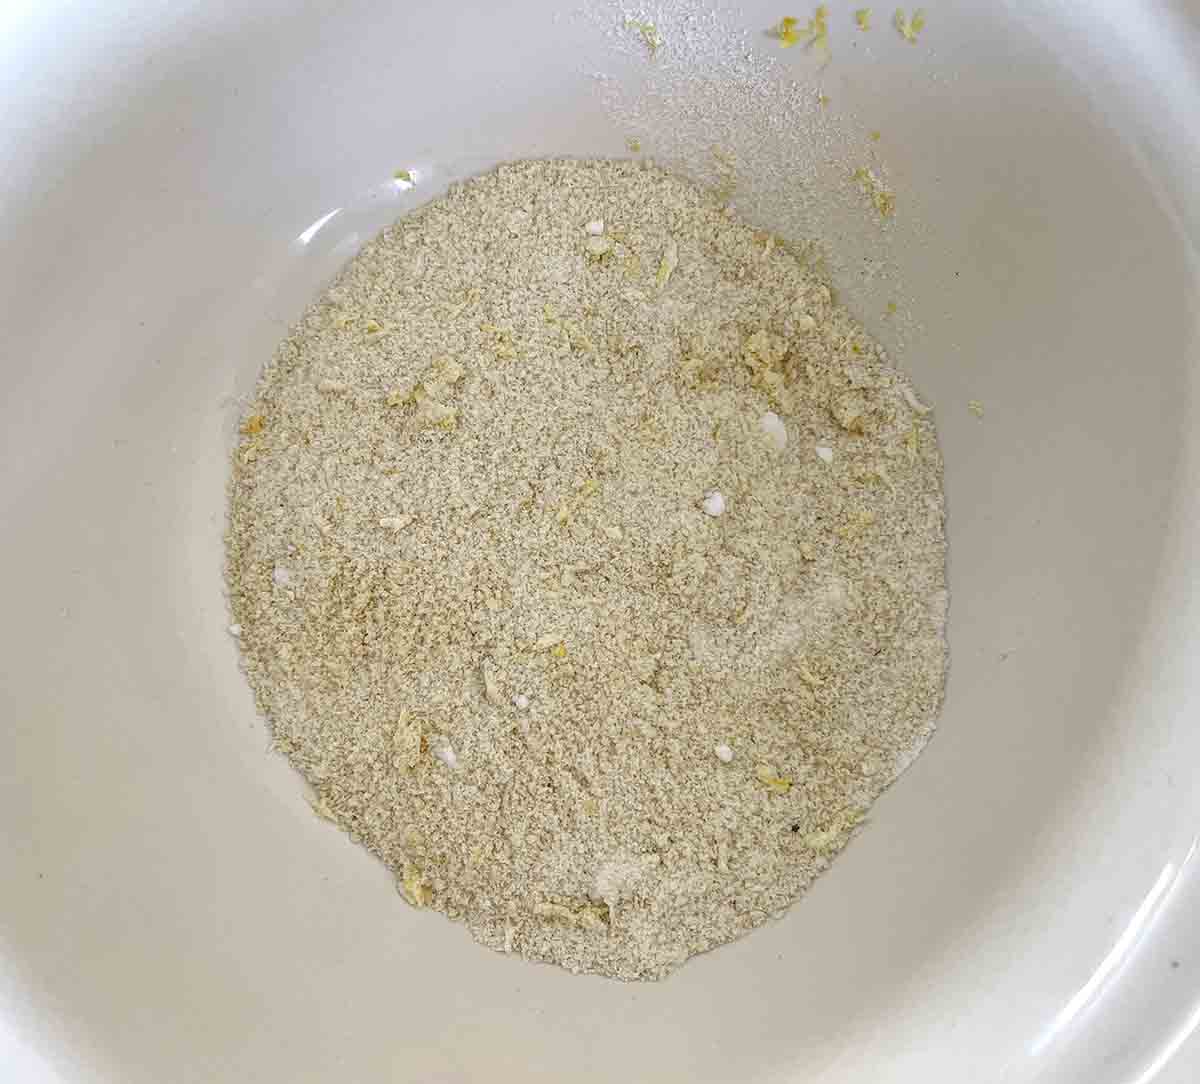 dry filling ingredients in a bowl.